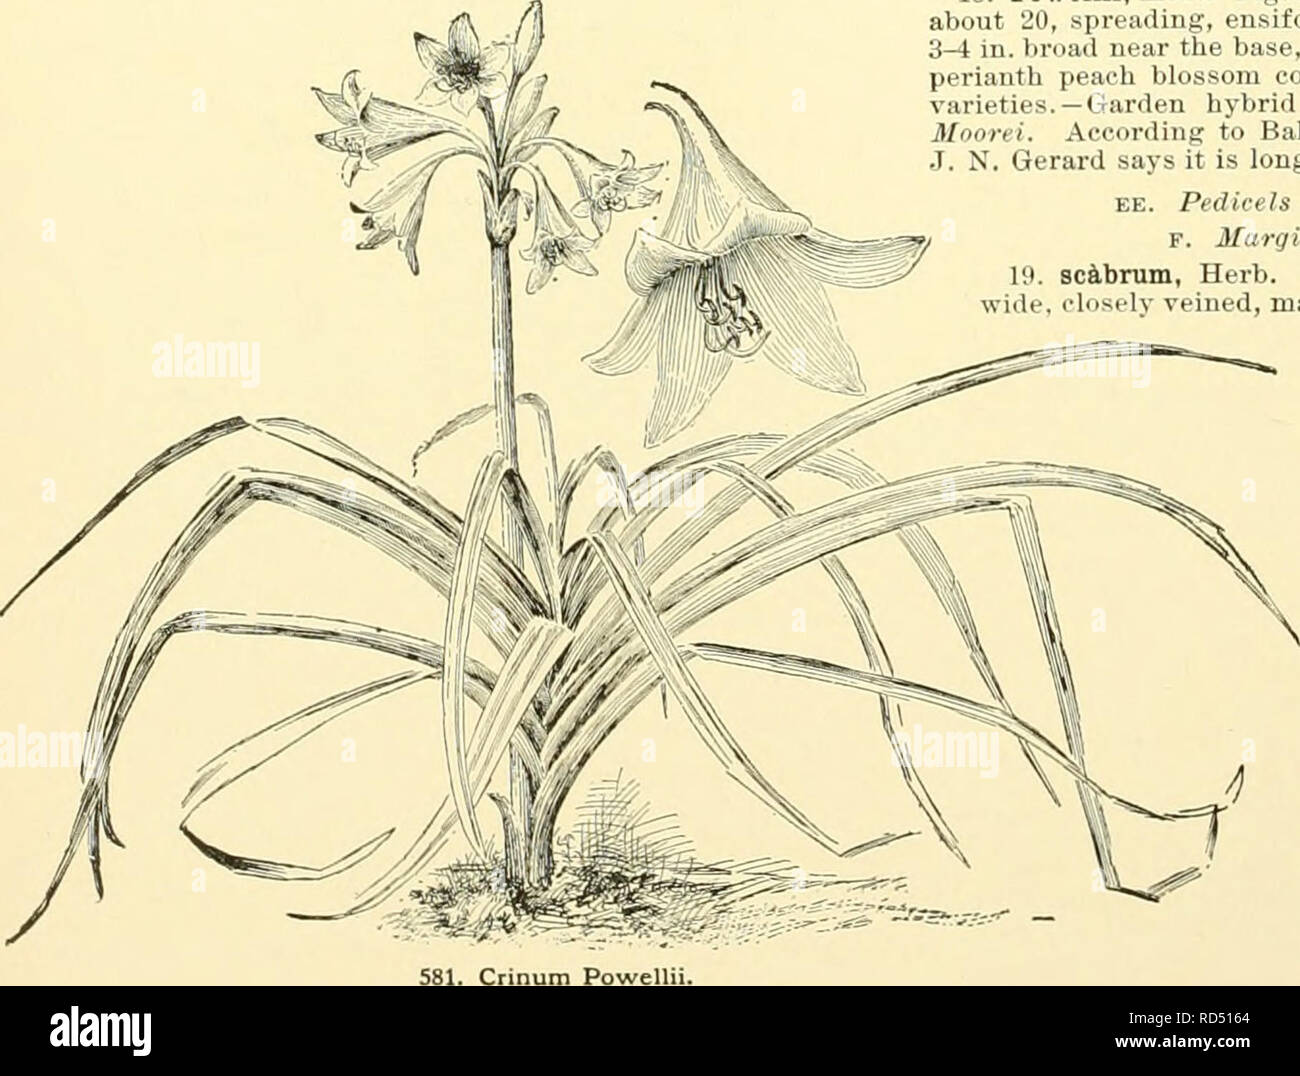 . Cyclopedia of American horticulture, comprising suggestions for cultivation of horticultural plants, descriptions of the species of fruits, vegetables, flowers and ornamental plants sold in the United States and Canada, together with geographical and biographical sketches, and a synopsis of the vegetable kingdom. Gardening -- Dictionaries; Plants -- North America encyclopedias. CRINUM species from Zanzibar, probably not known outside of one or two botanical gardens. 13. vari&amp;bile, Herb. (C crassifdlitim, Herb.). Bulb ovoid, 3^ in. thick : Ivs. 1 J^-2 ft. long, 2 in. wide, weak: fls. 10-1 Stock Photo